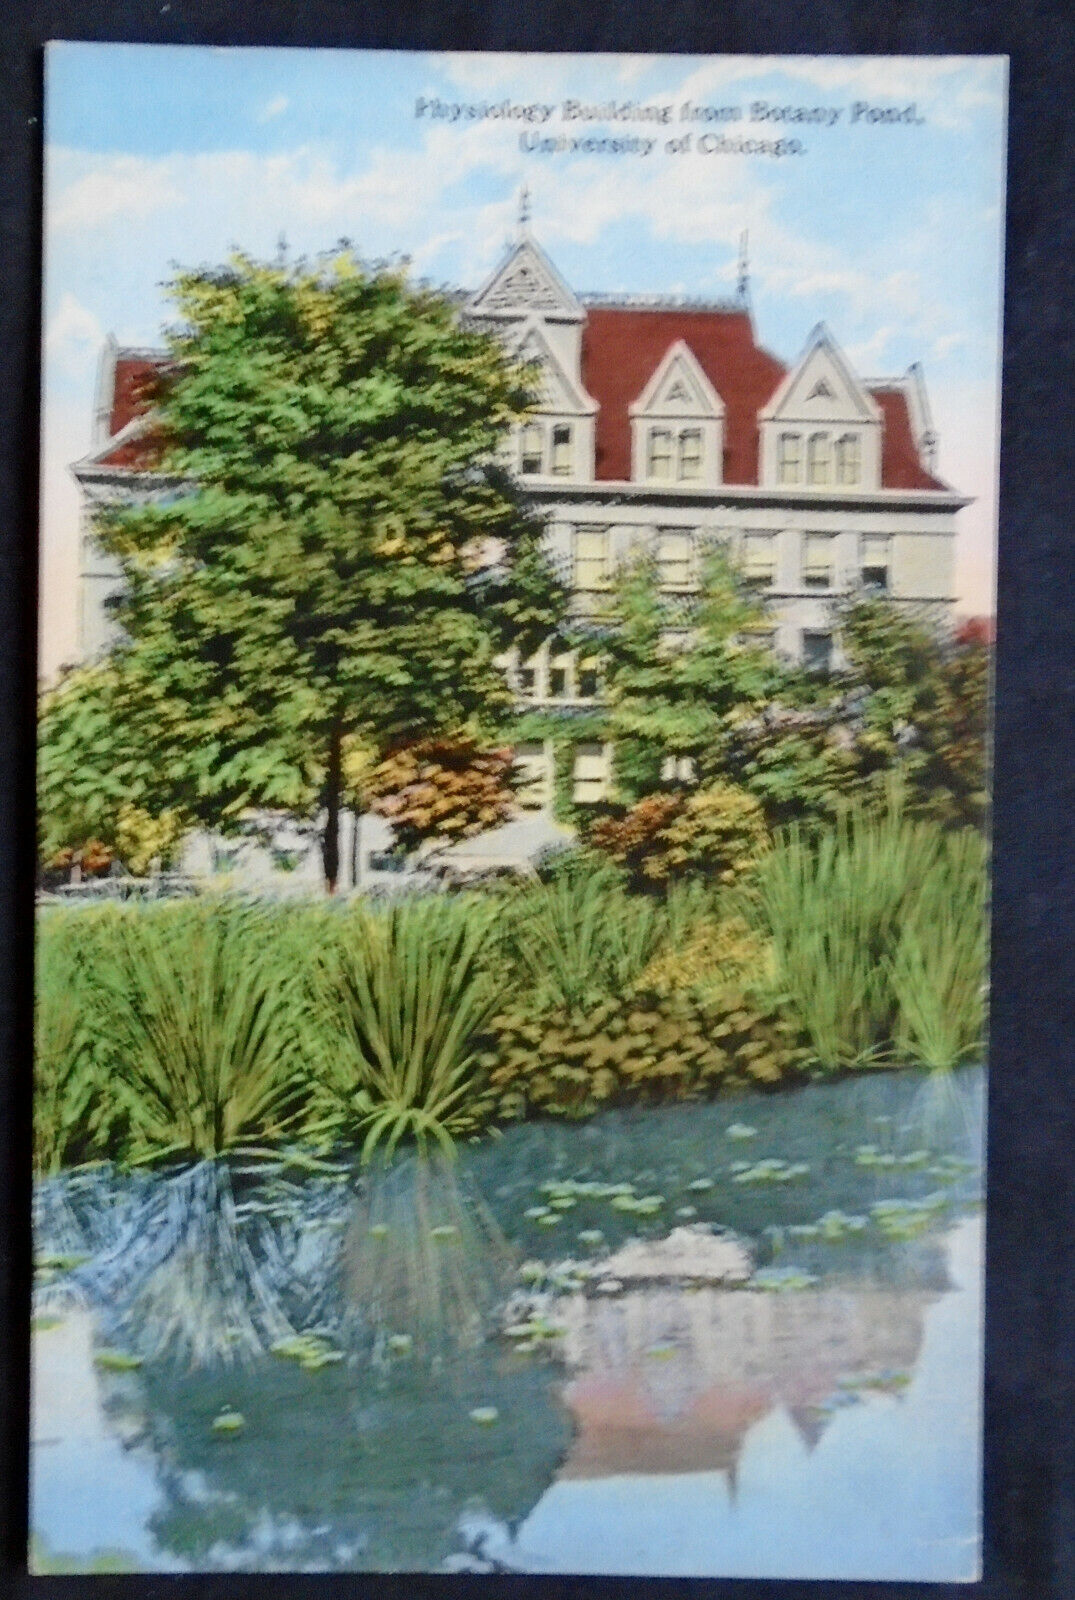 University of Chicago, Physiology Building from Botany Pond, circa 1910-20